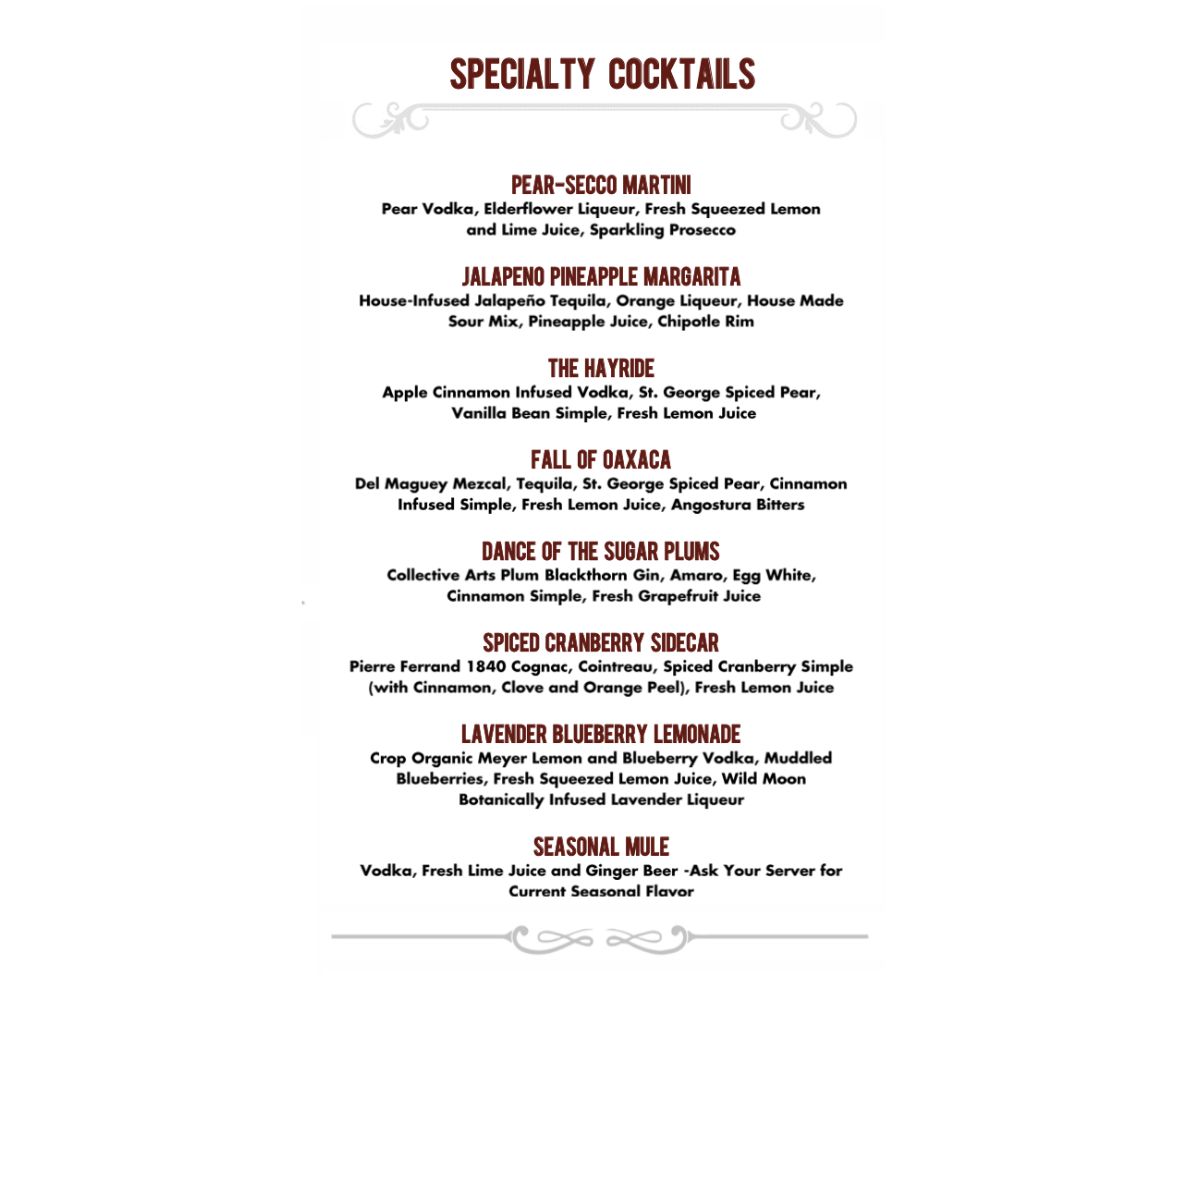 SPECIALTY COCKTAILS